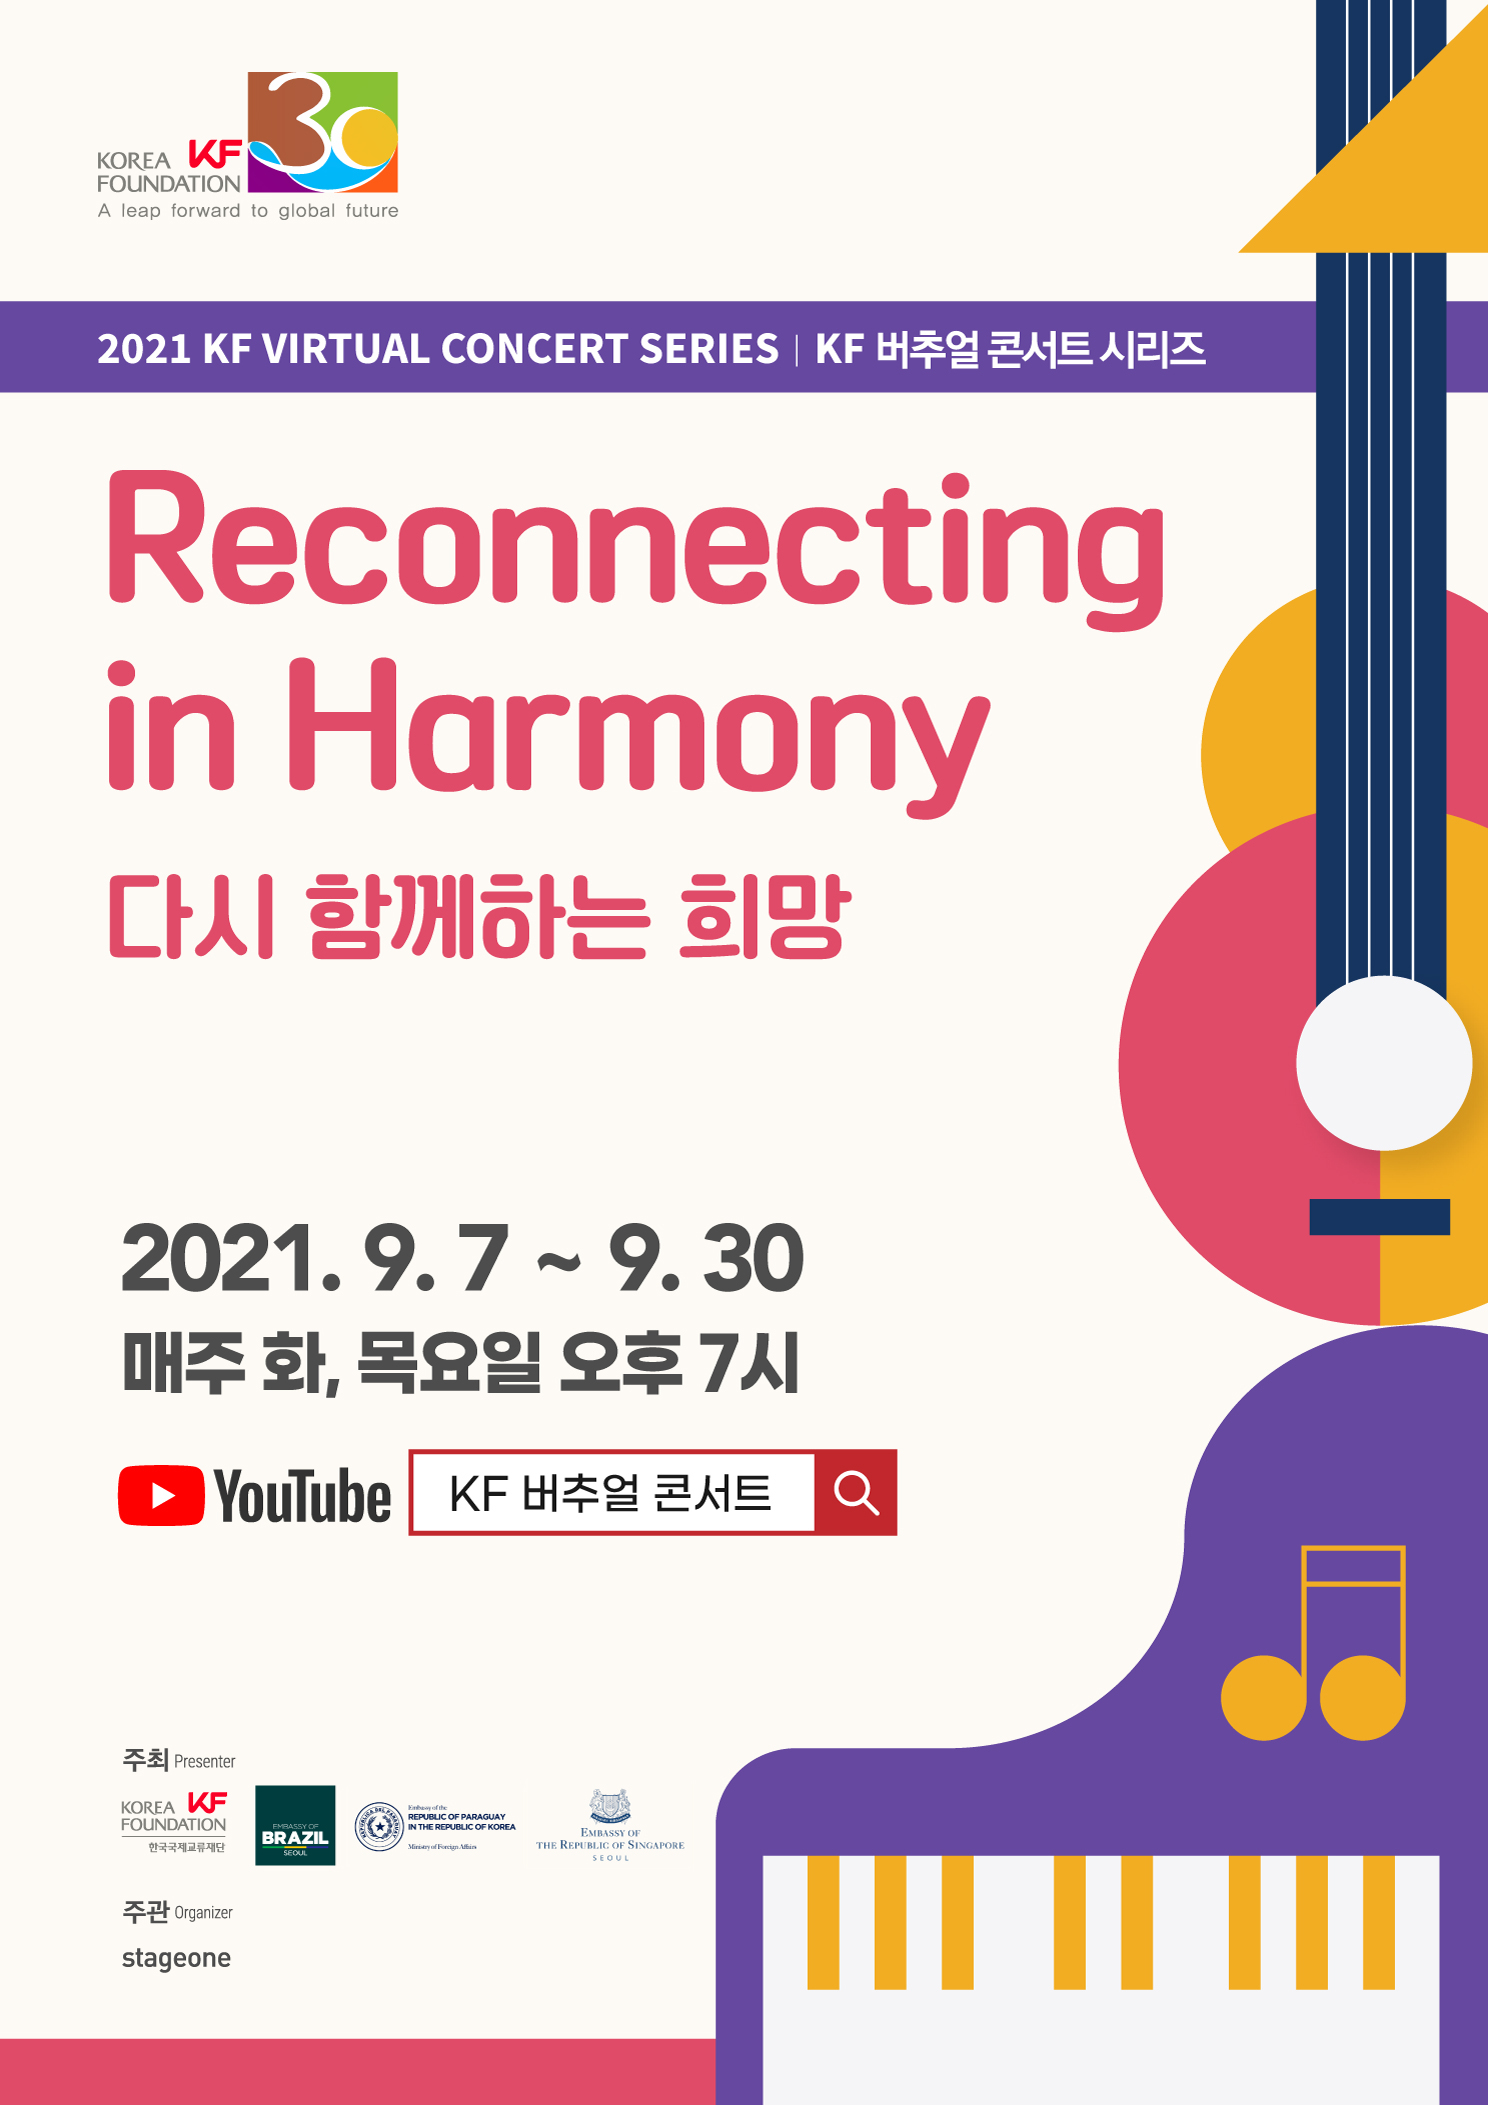 2021 KF Virtual Concert Series “Reconnecting in Harmony”